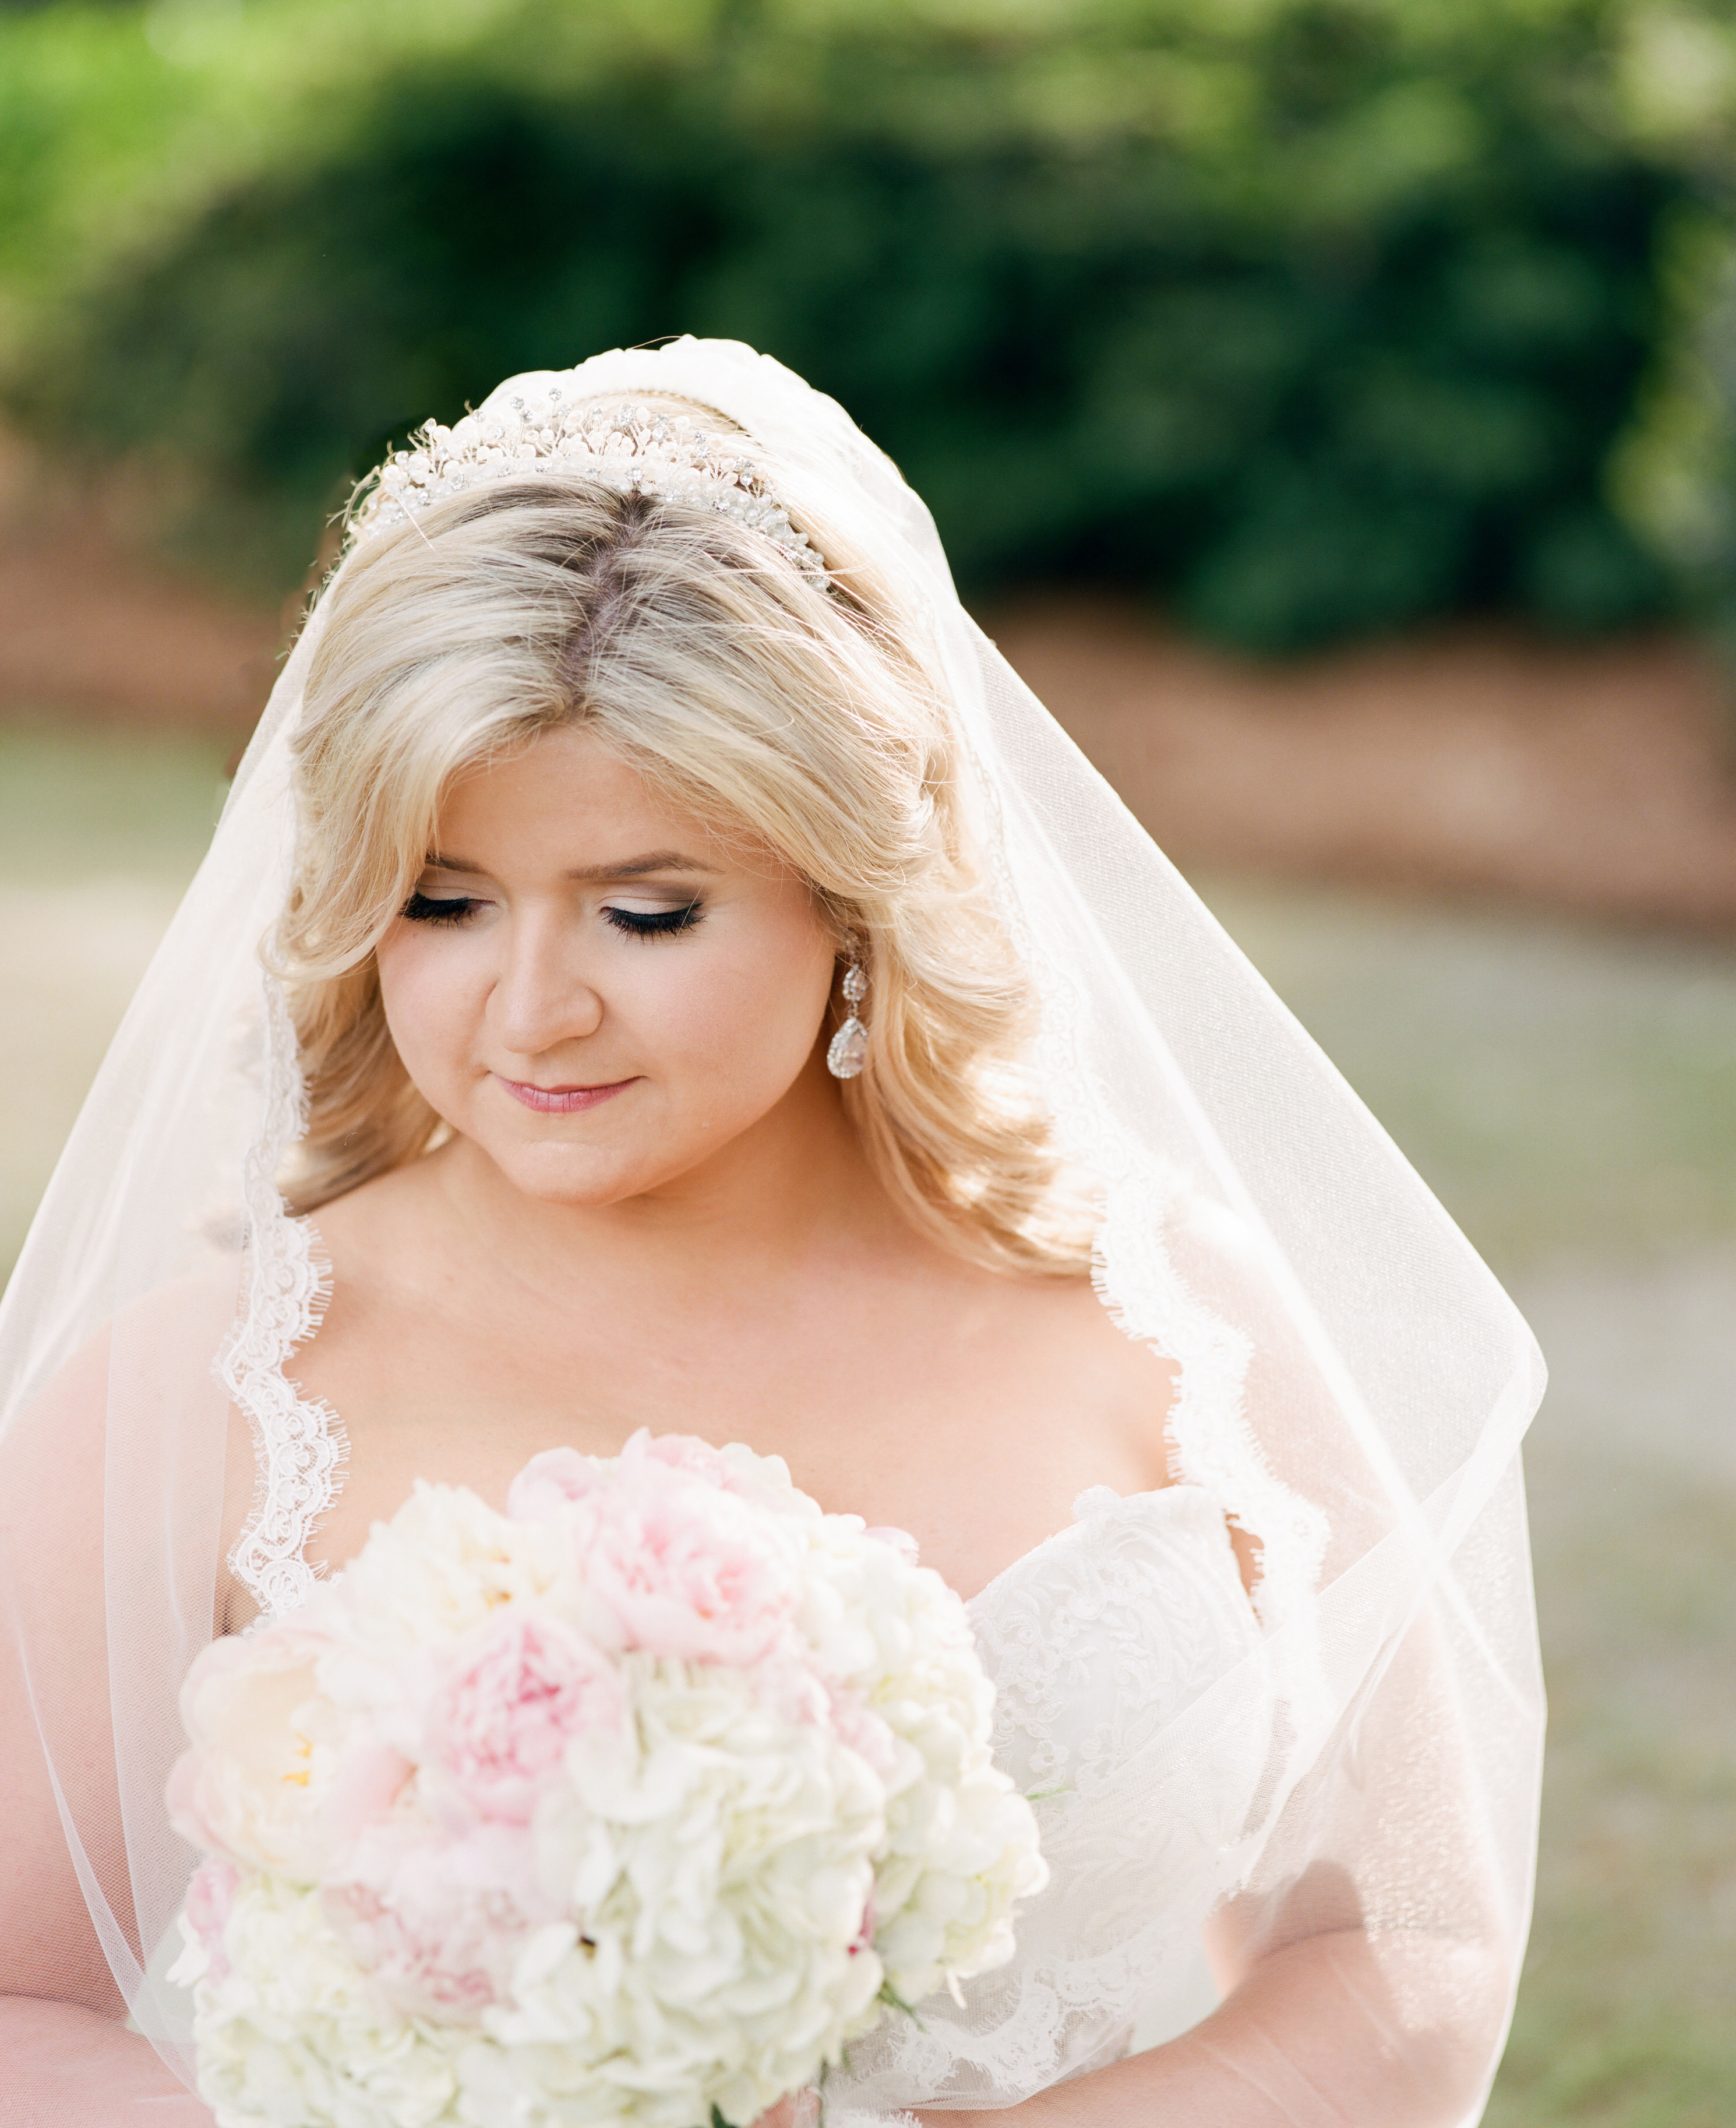 southern wedding traditions bride looking down photo